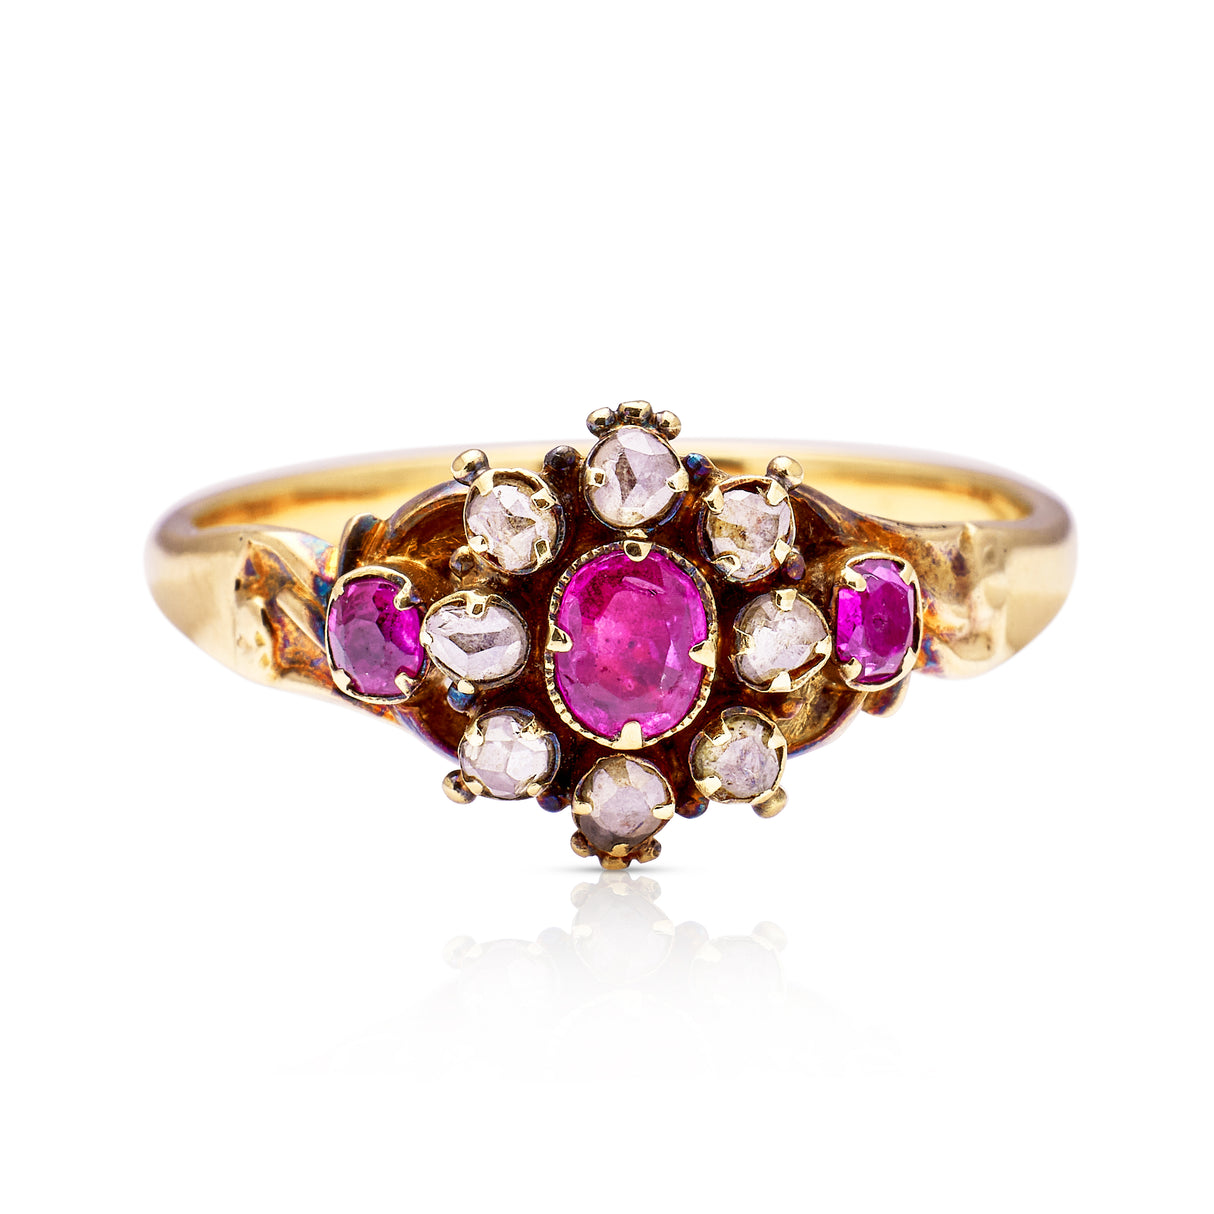 Antique, early Victorian ruby & diamond cluster ring, 18ct yellow gold